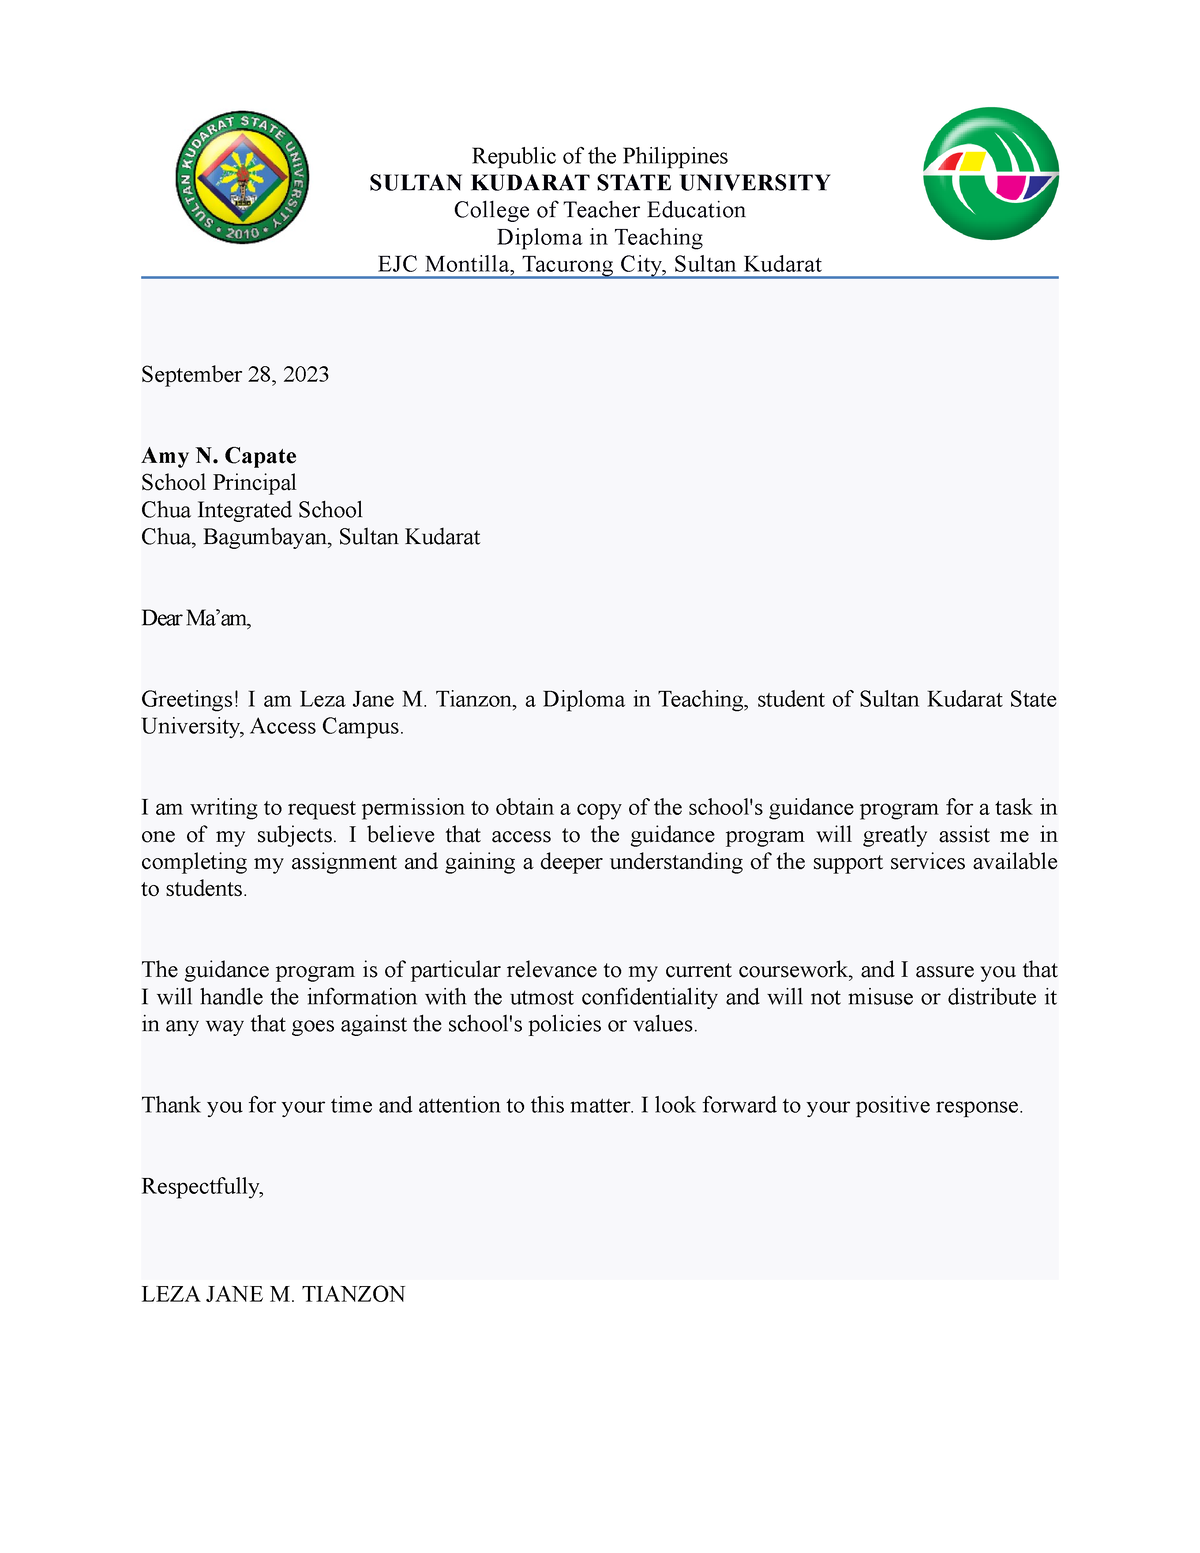 Permission Letter - Republic of the Philippines SULTAN KUDARAT STATE ...